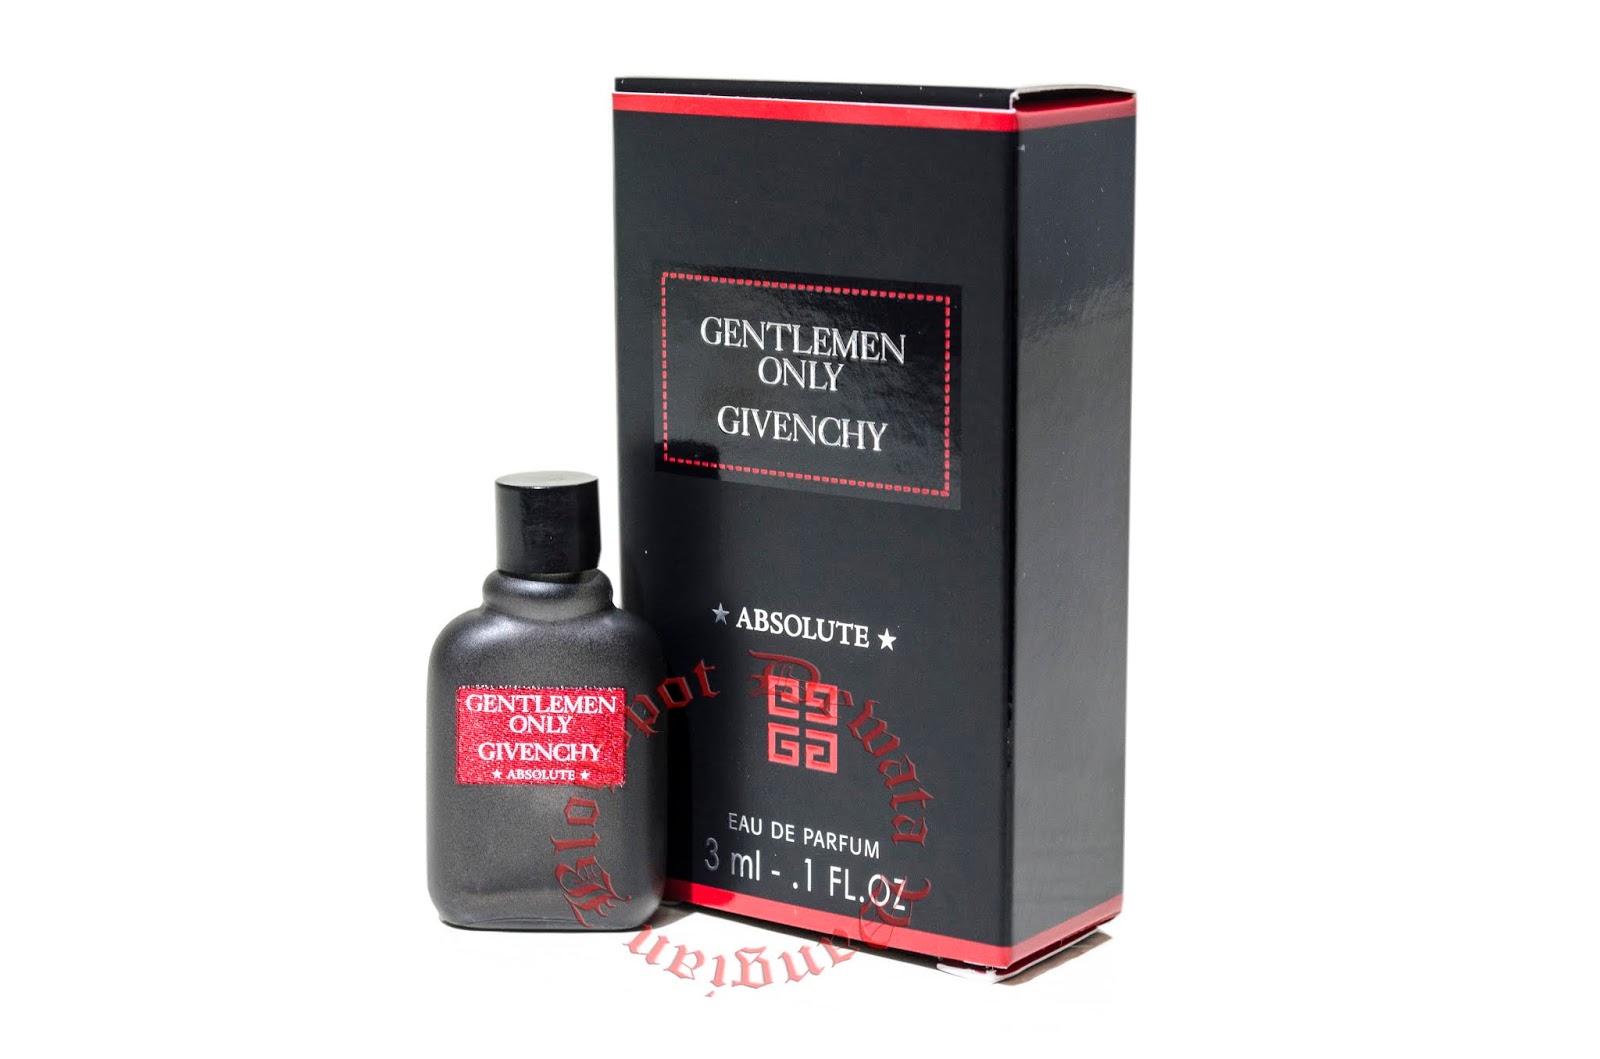 Only absolute. Givenchy Gentlemen only absolute. Givenchy Gentlemen only absolute тестер. Gentleman миниатюра. Givenchy упаковка туалетной воды Gentleman only.